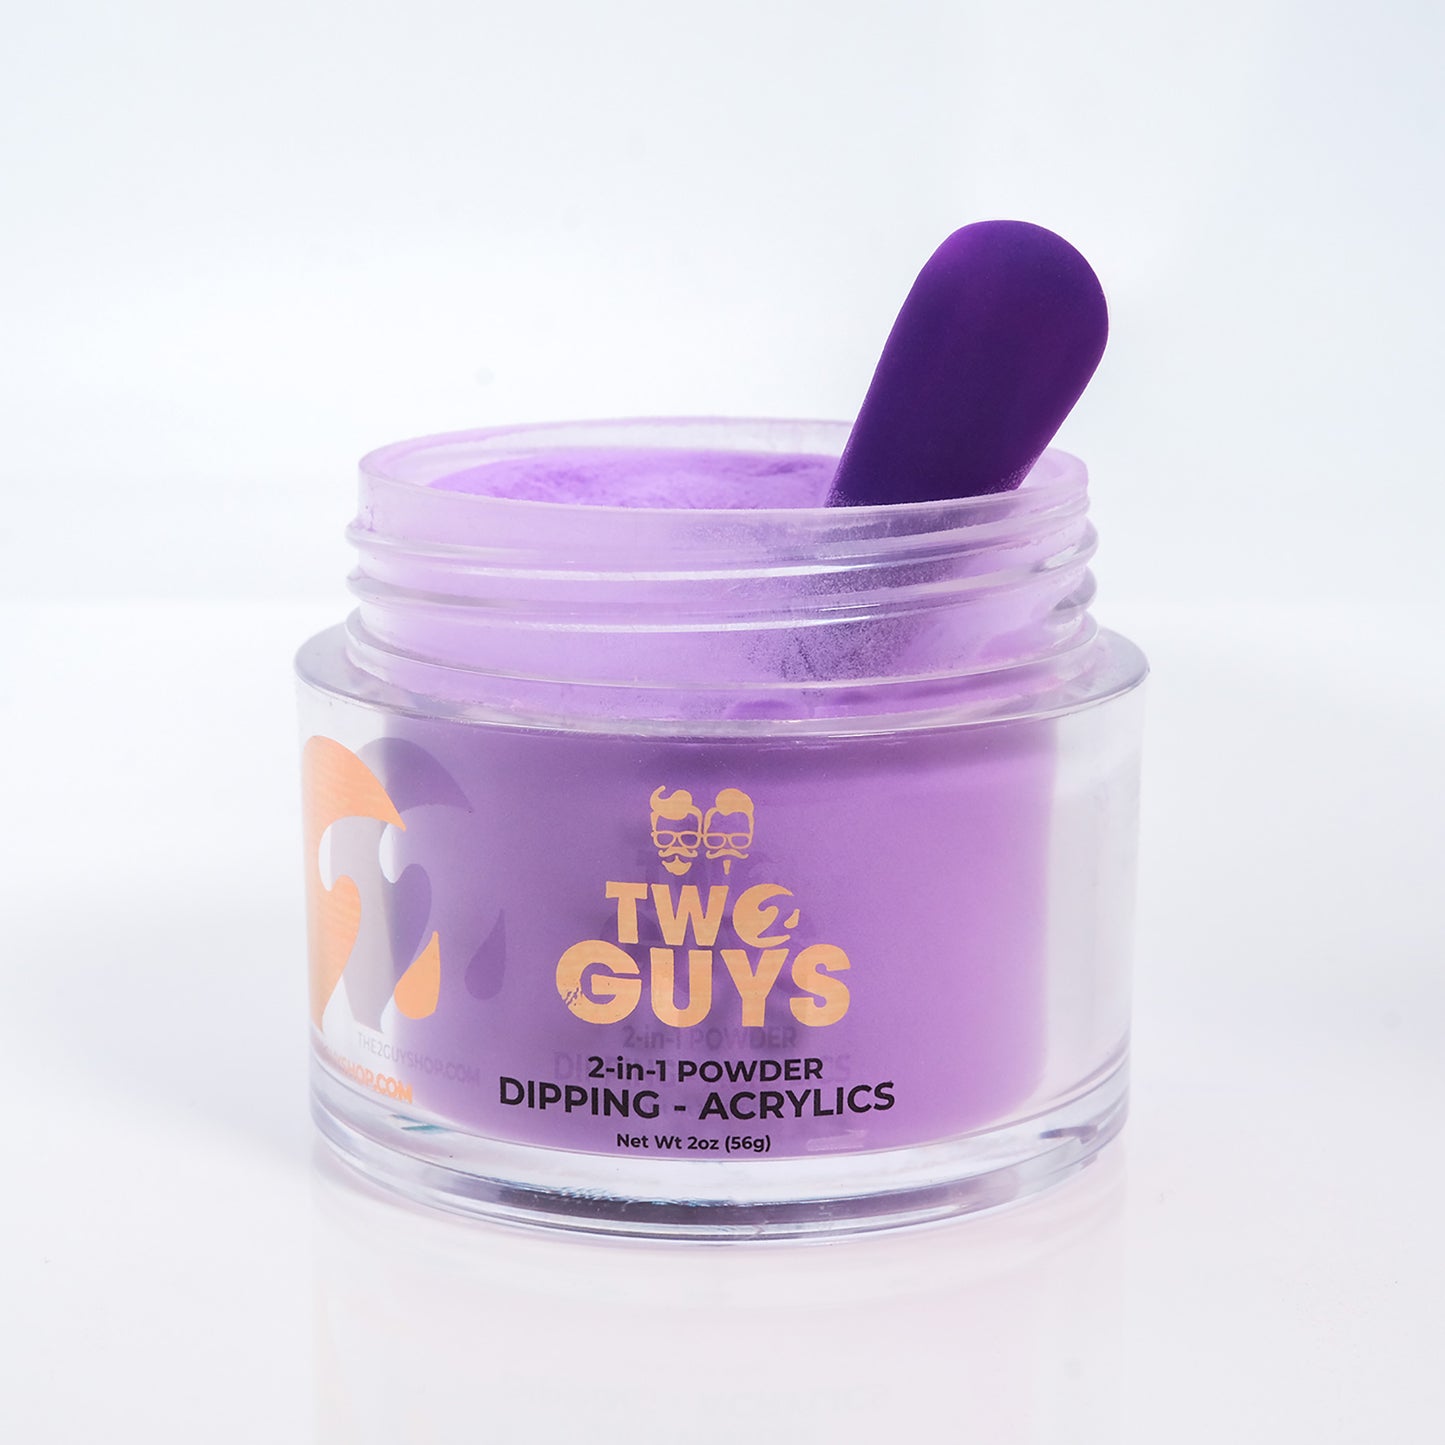 365 Days of Love Collection #89-#118 - 2Guys Acrylic Powder